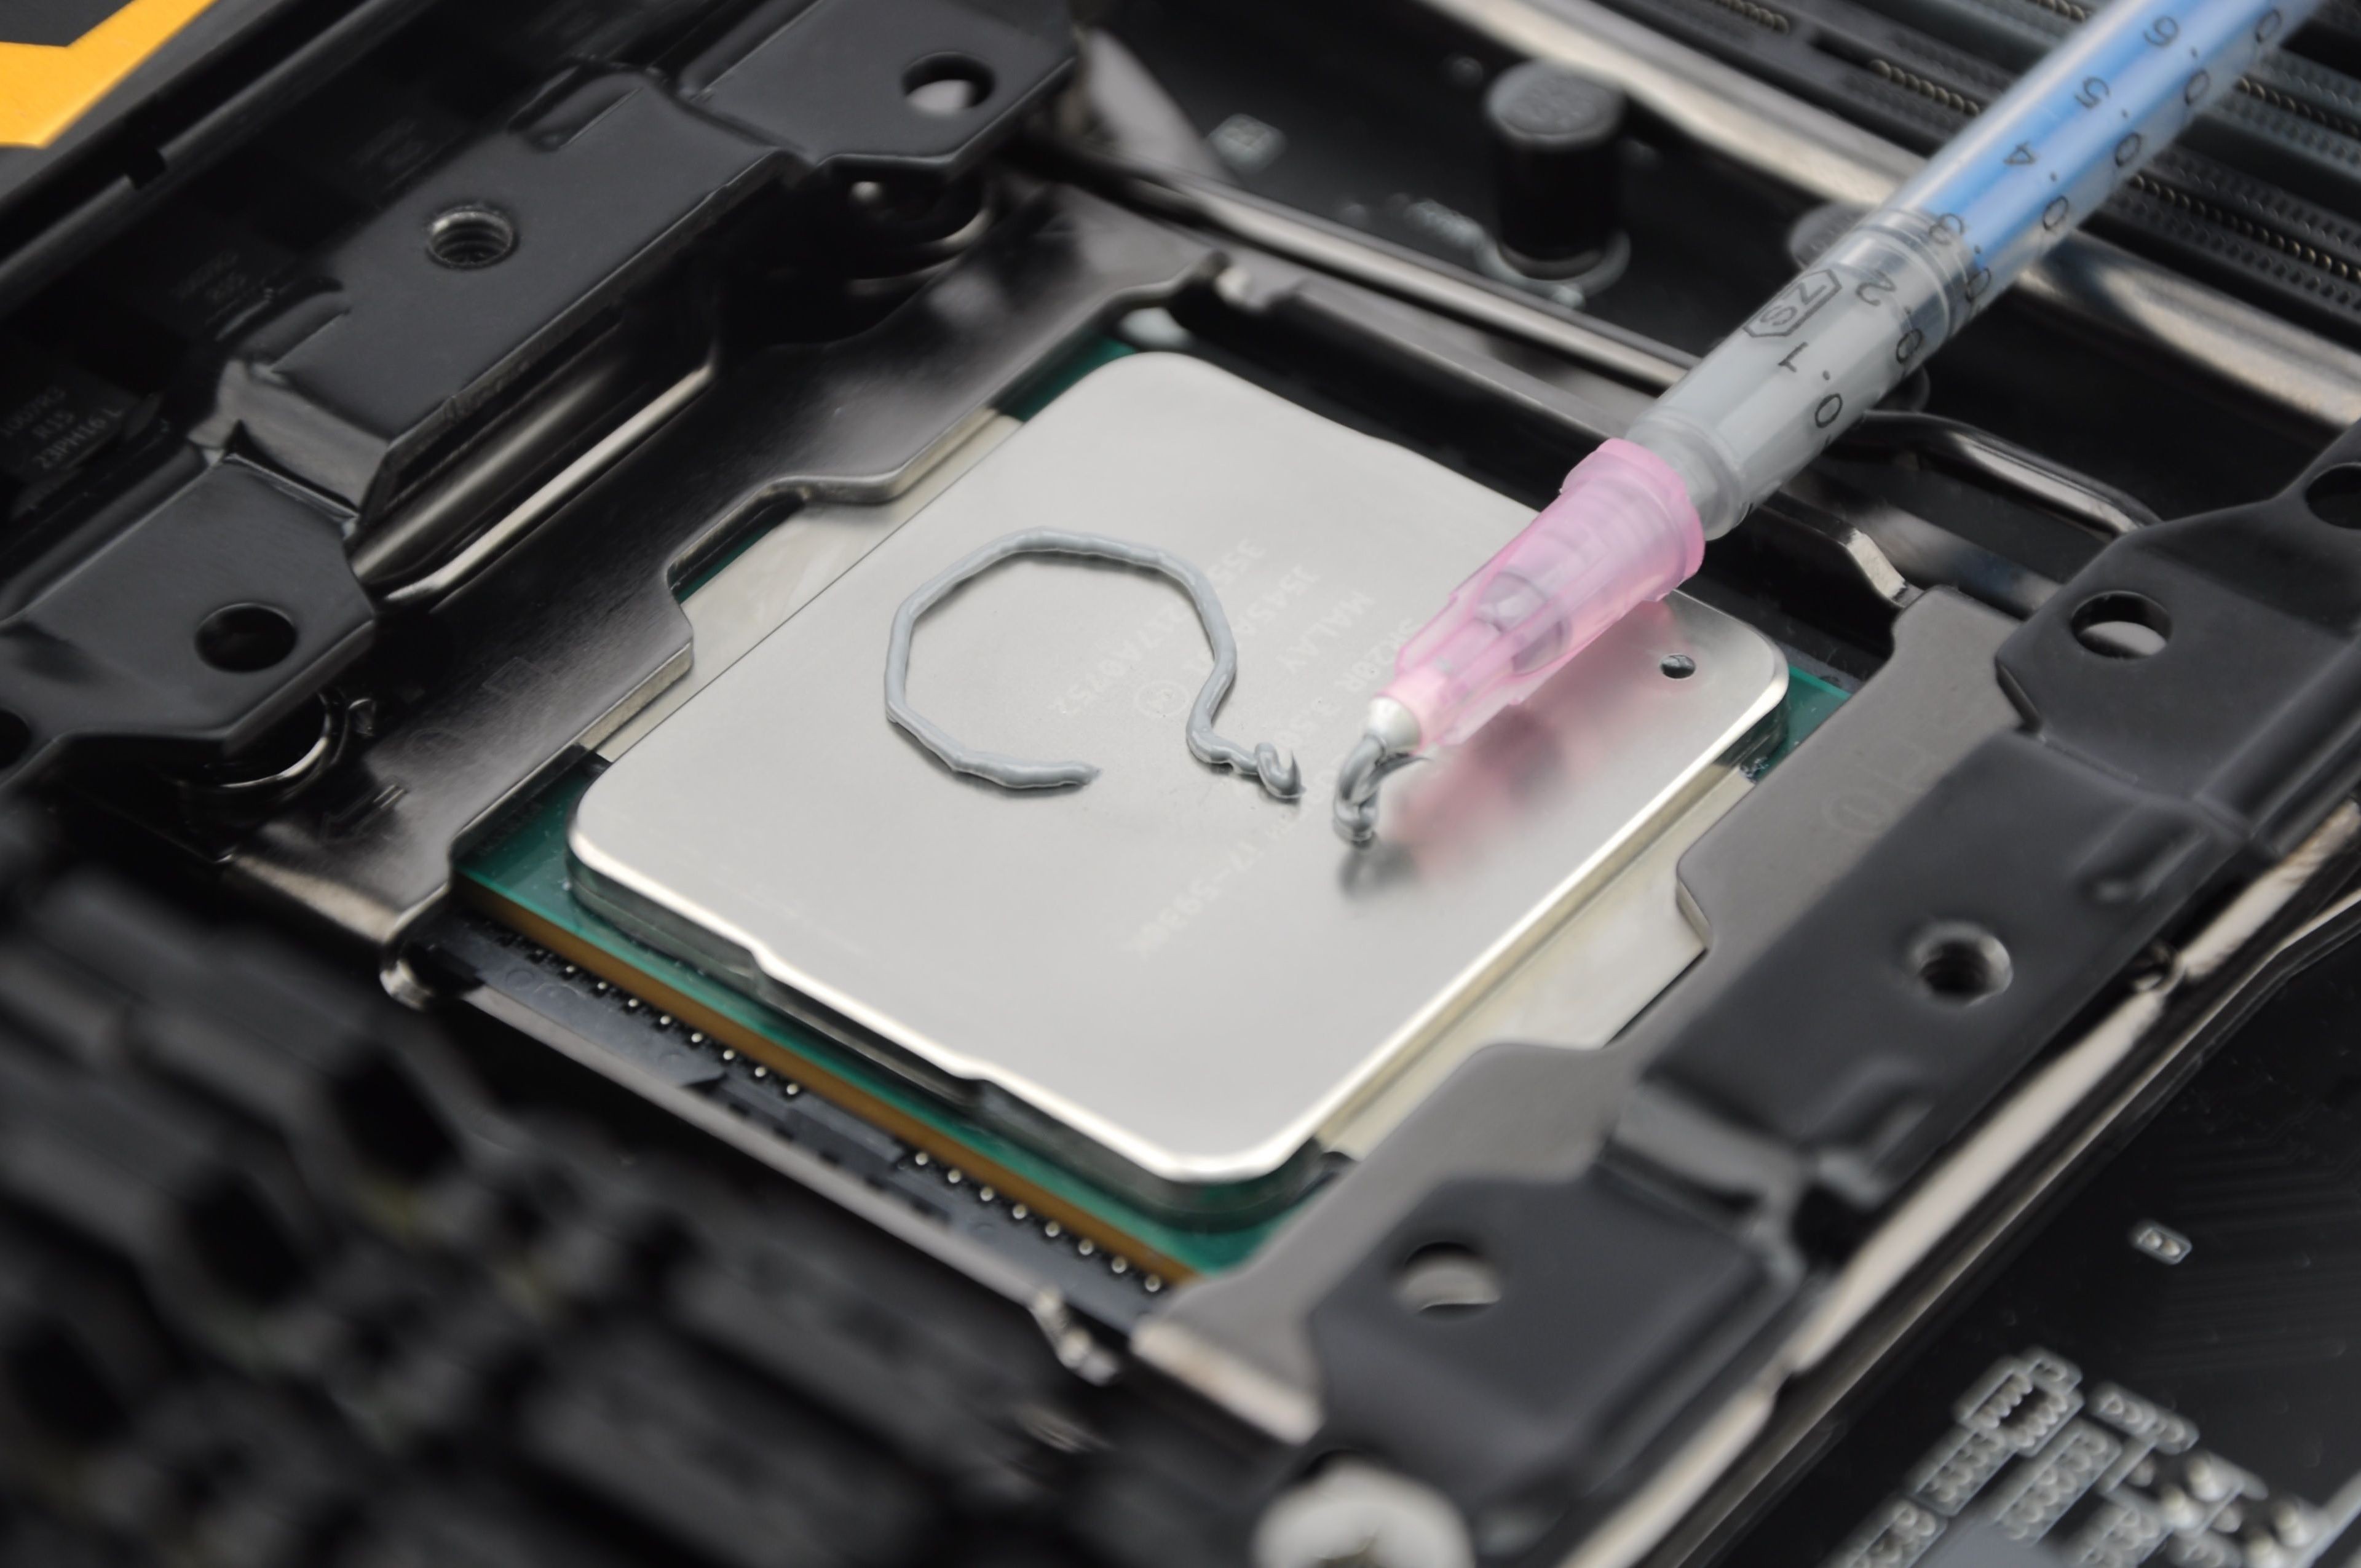 How to Apply Thermal Paste to Your CPU